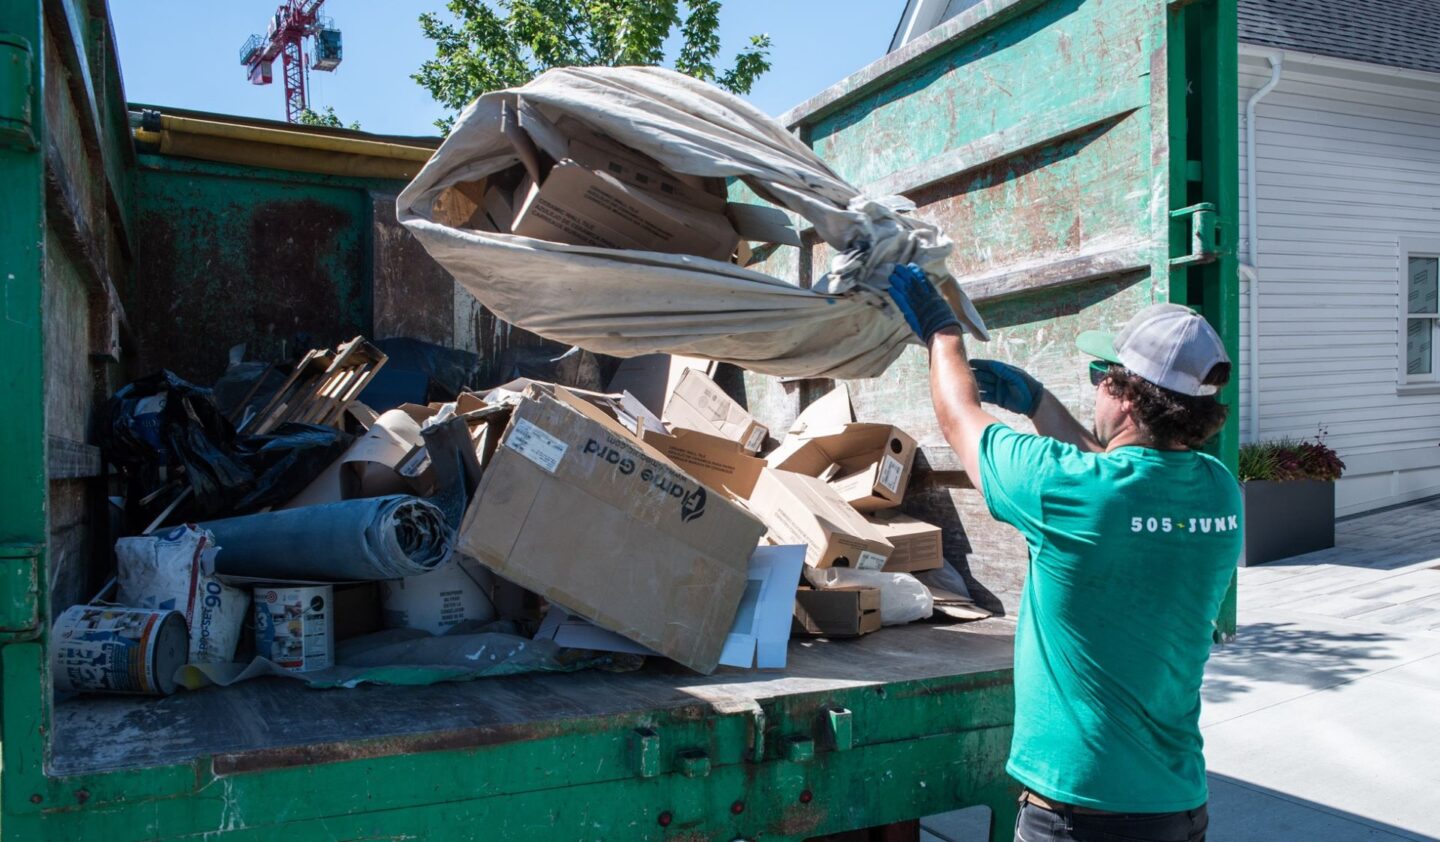 A 505-Junk employee throwing debris into the truck during a renovation removal in North Vancouver.